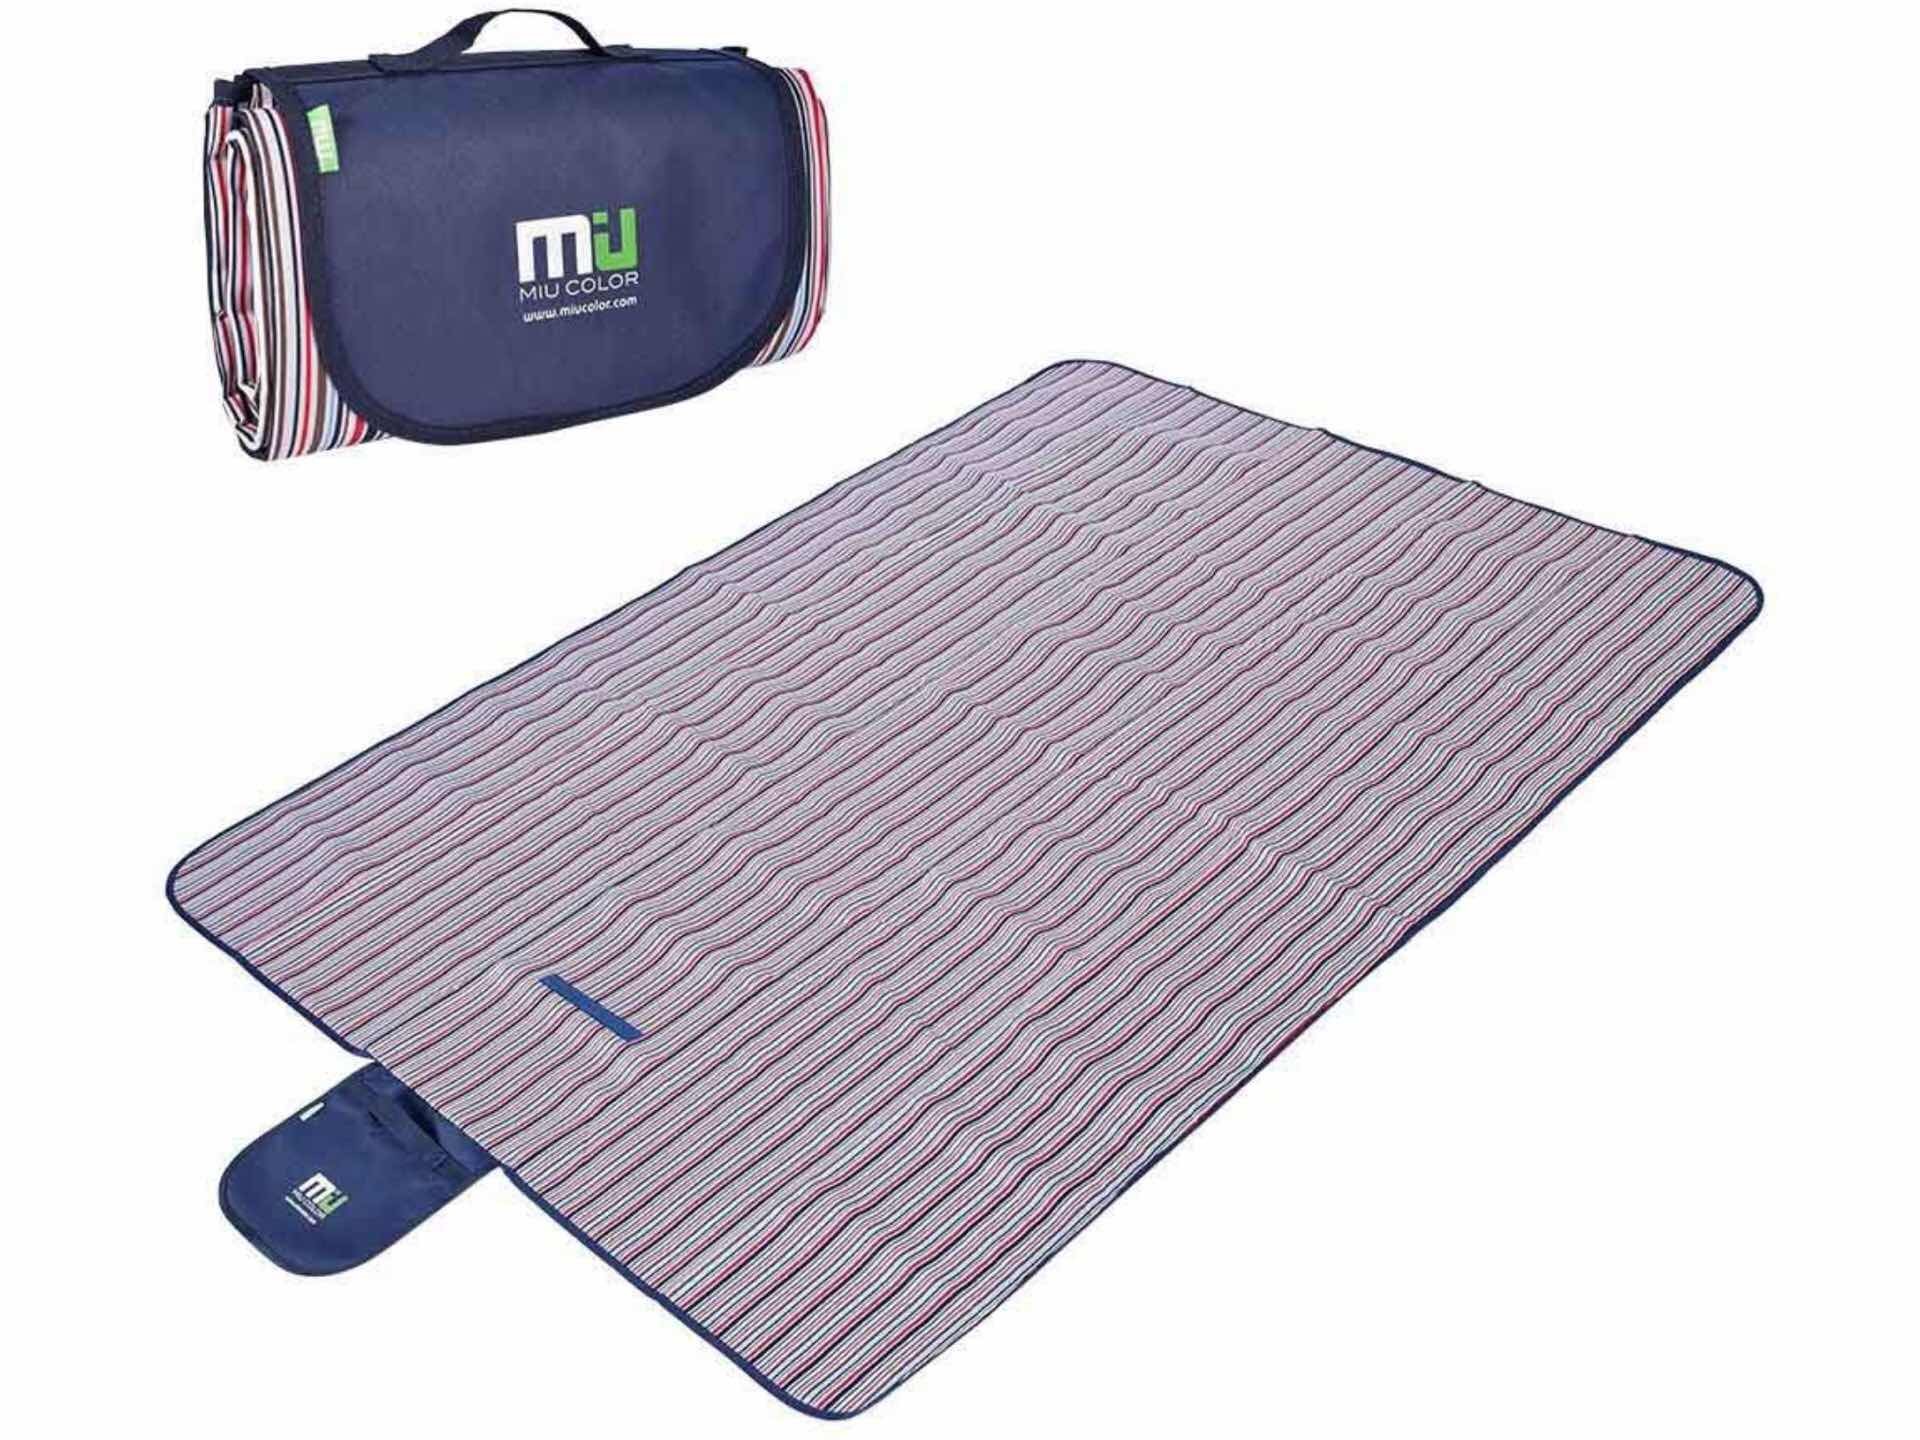 MIU COLOR waterproof and sandproof picnic blanket. ($17; available in three colors/patterns)